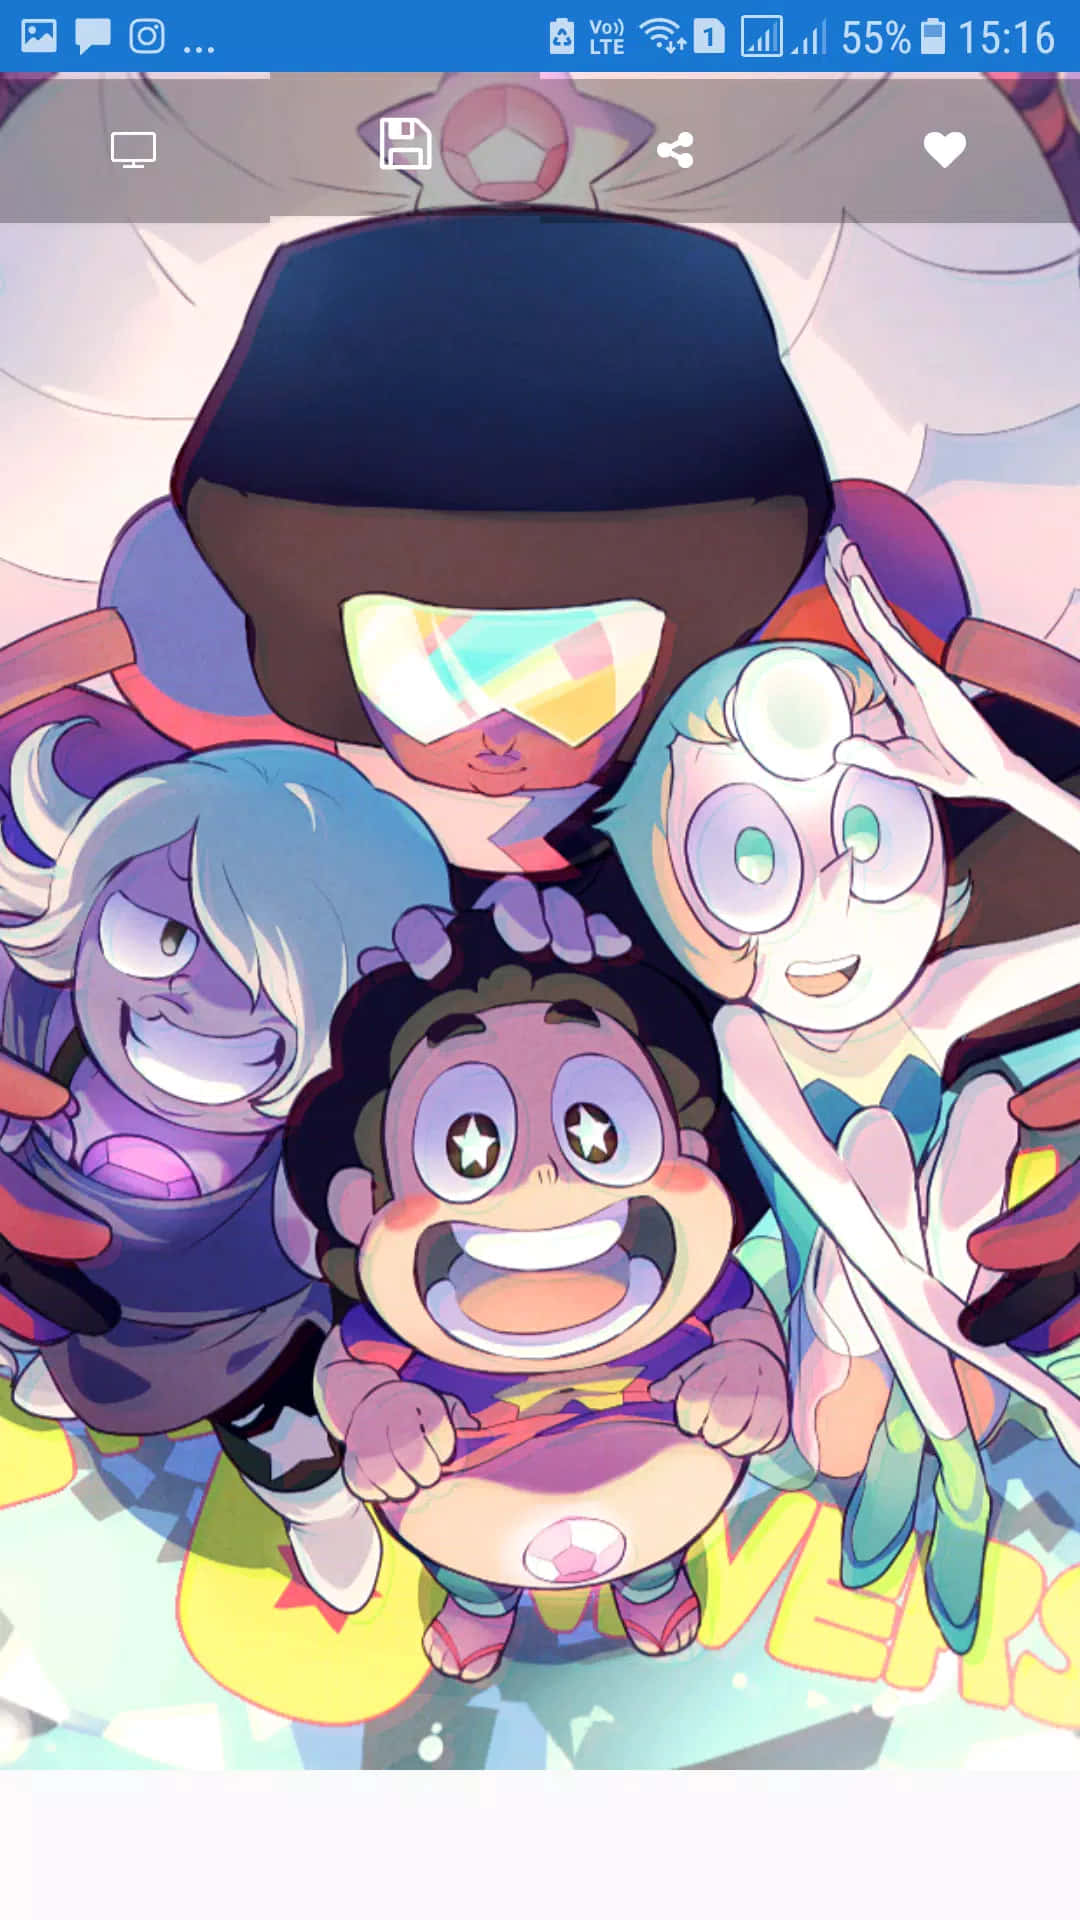 Stay Connected with the Steven Universe Phone Wallpaper